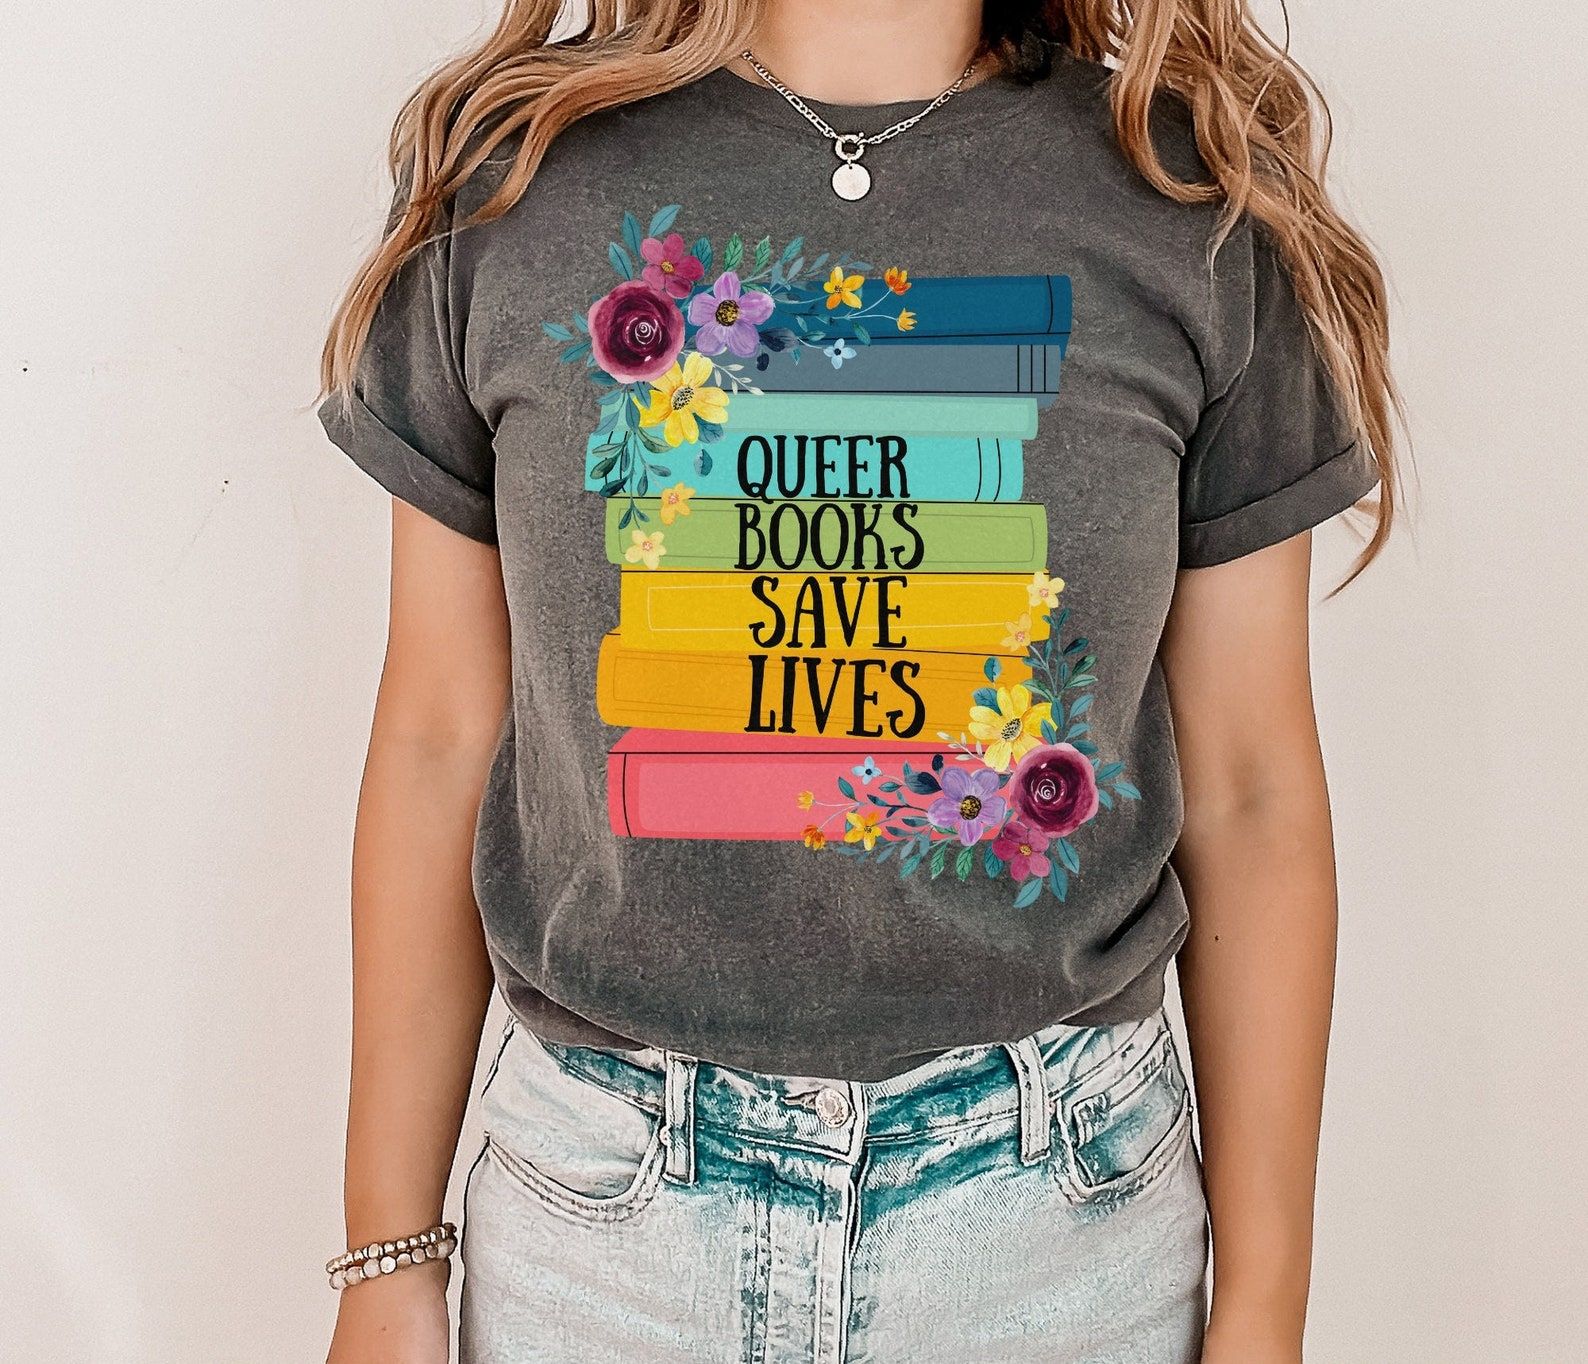 A photo of someone wearing a tee shirt with an illustration of a stack of rainbow colored book spines, florals, and the words "Queer books save lives."